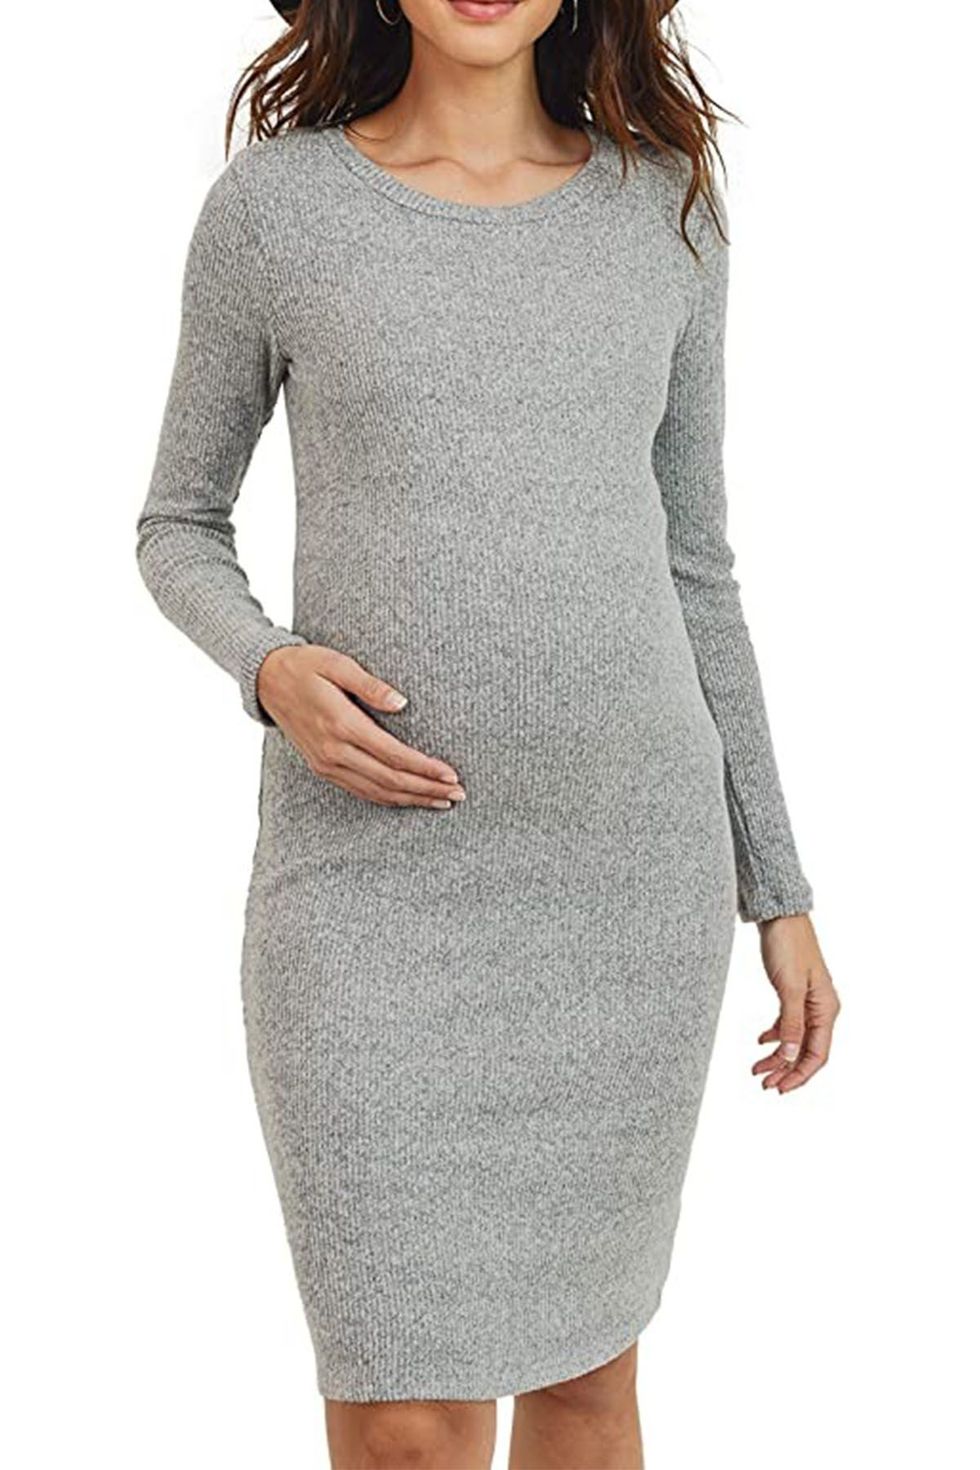 Women's Ribbed Maternity Knit Dress with Long Sleeve